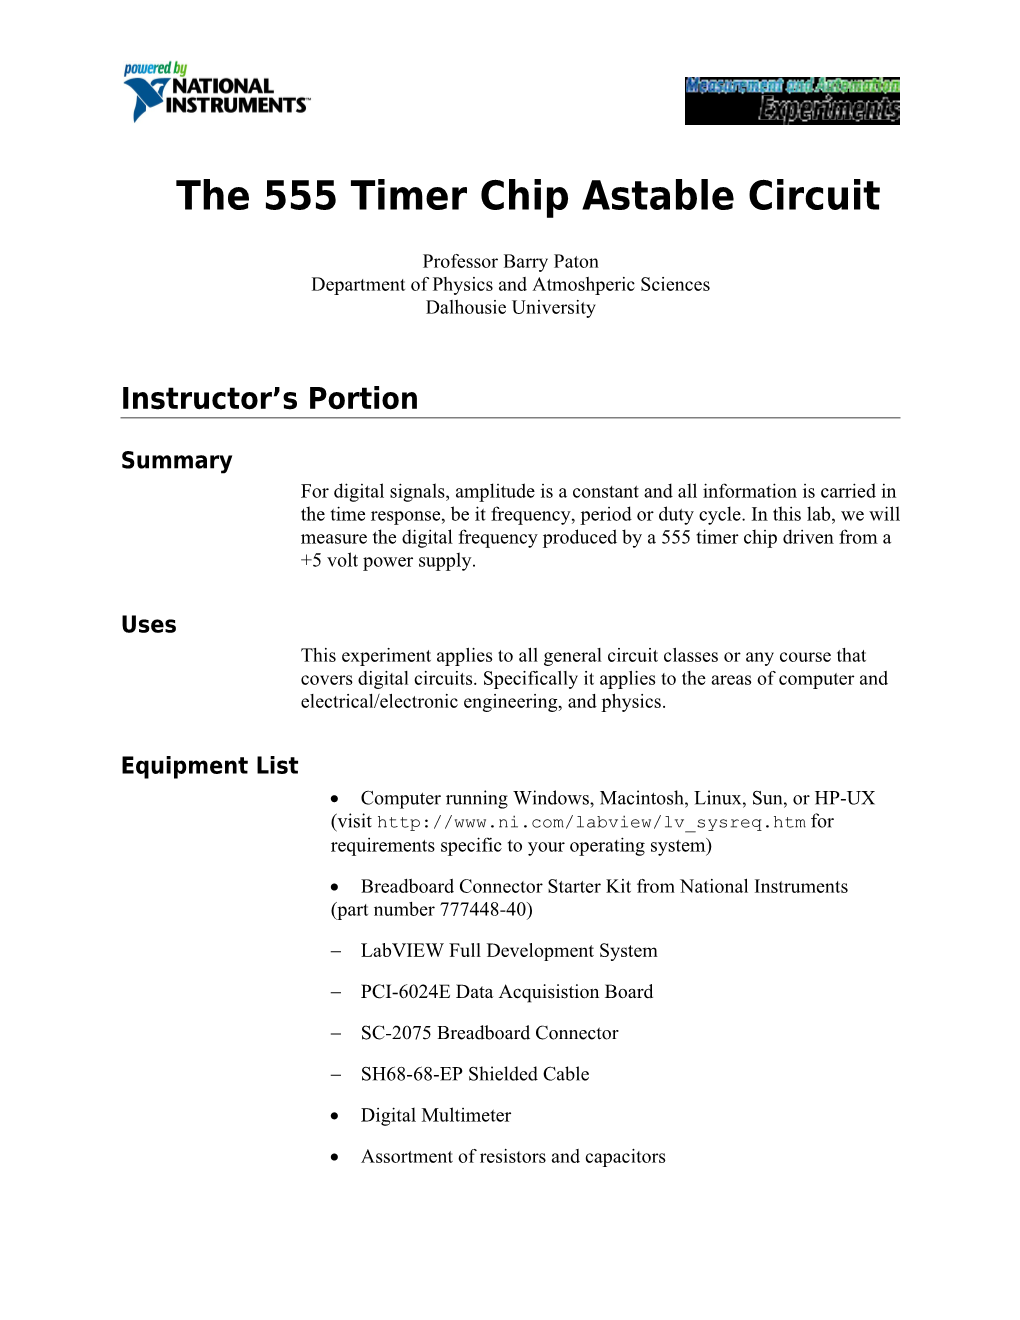 The 555 Timer Chip Astable Circuit